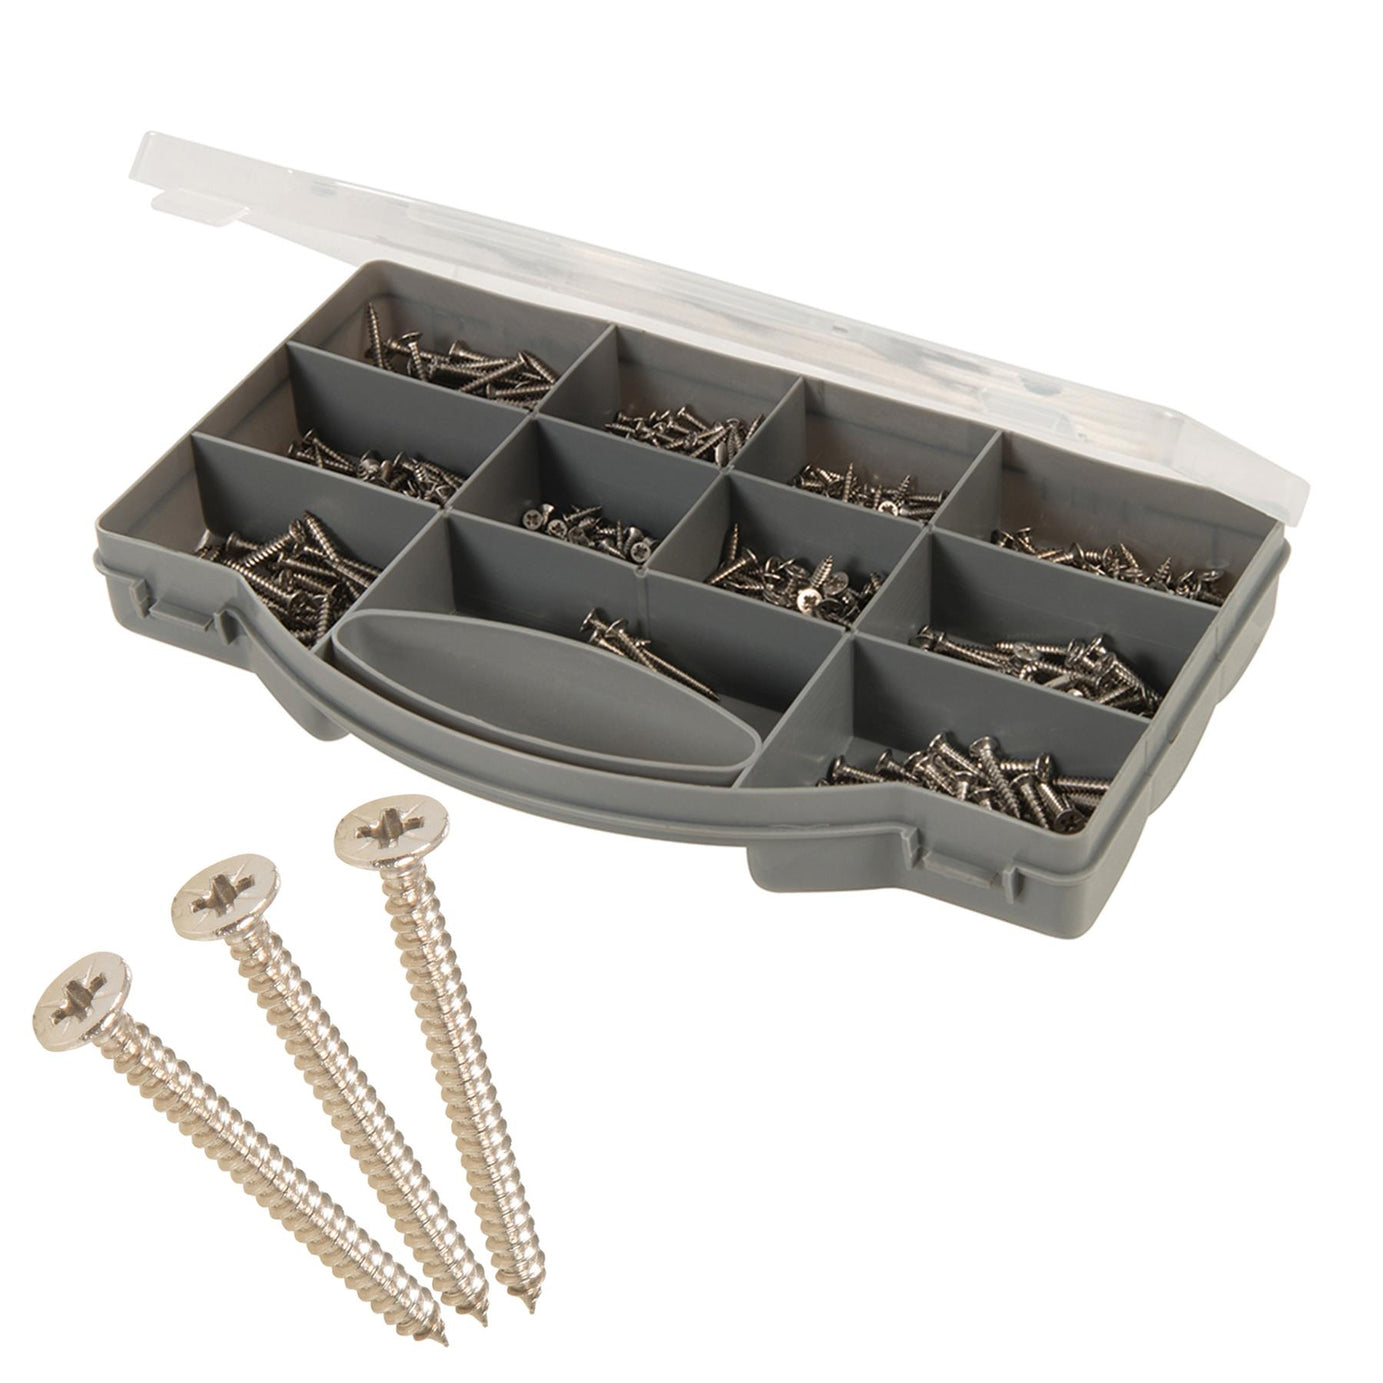 570Pce A2 Stainless Steel Self-Tappers Pack A2 Stainless Steel Pzd Countersunk